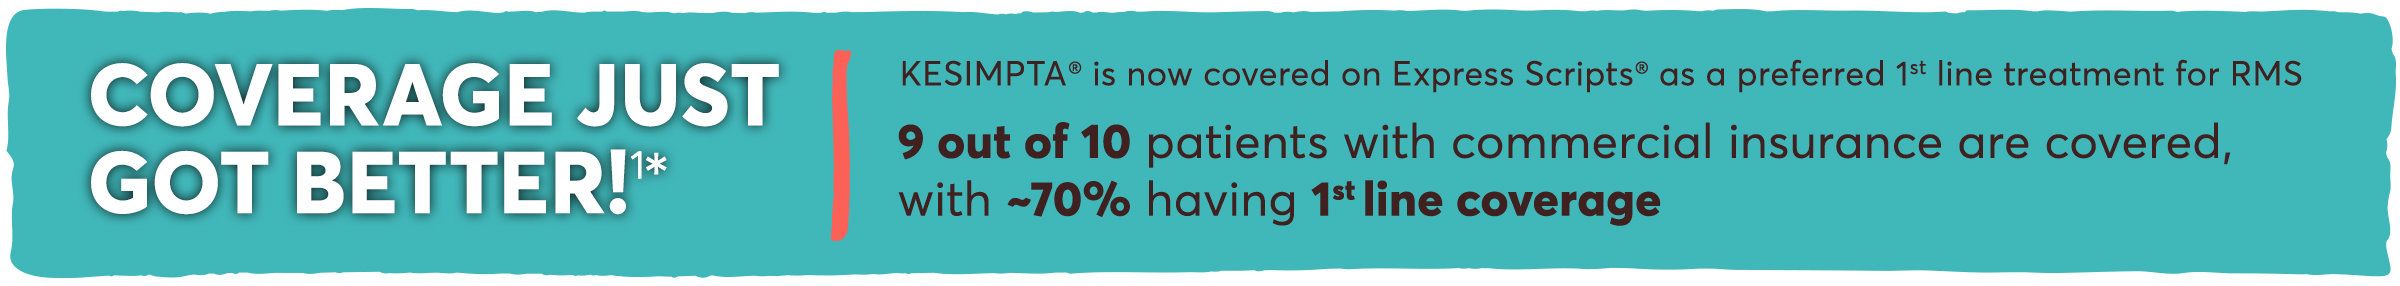 Coverage just got better: KESIMPTA is now covered on Express Scripts as a preferred 1st line treatment for RMS. 9 out of 10 patients with commercial insurance are covered, with ~70% having 1st line coverage.